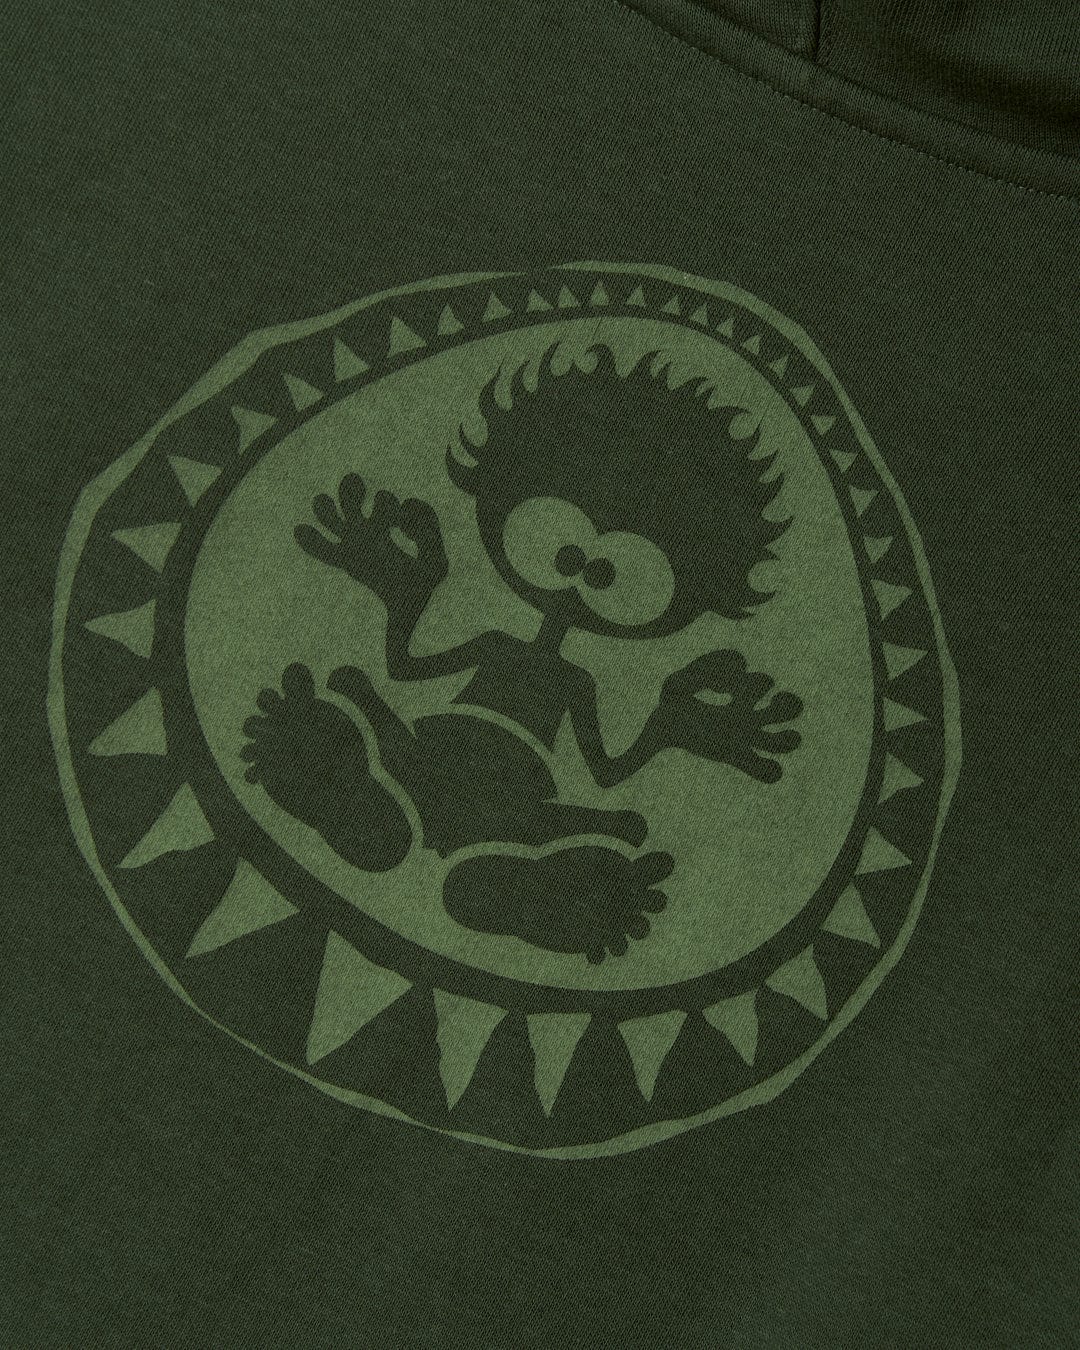 Dark green oversized Back in the Day - Recycled Kids Pop Hoodie featuring a circular emblem with a stylized, cartoonish character joyfully eating turkey inside an Aztec pattern border by Saltrock.